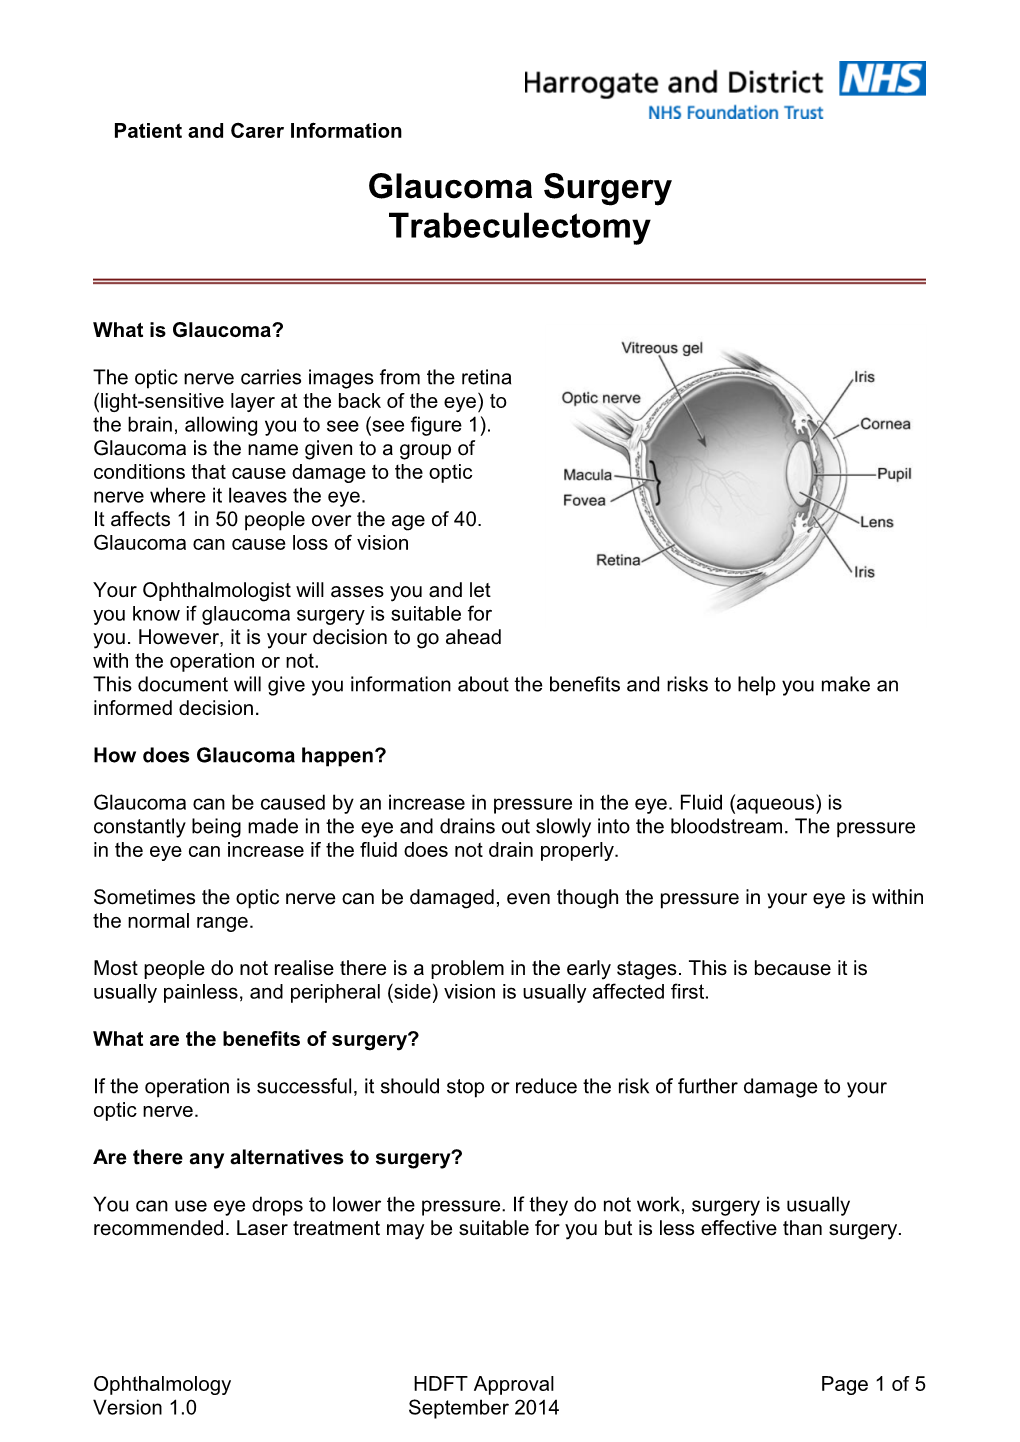 Glaucoma Surgery Trabeculectomy